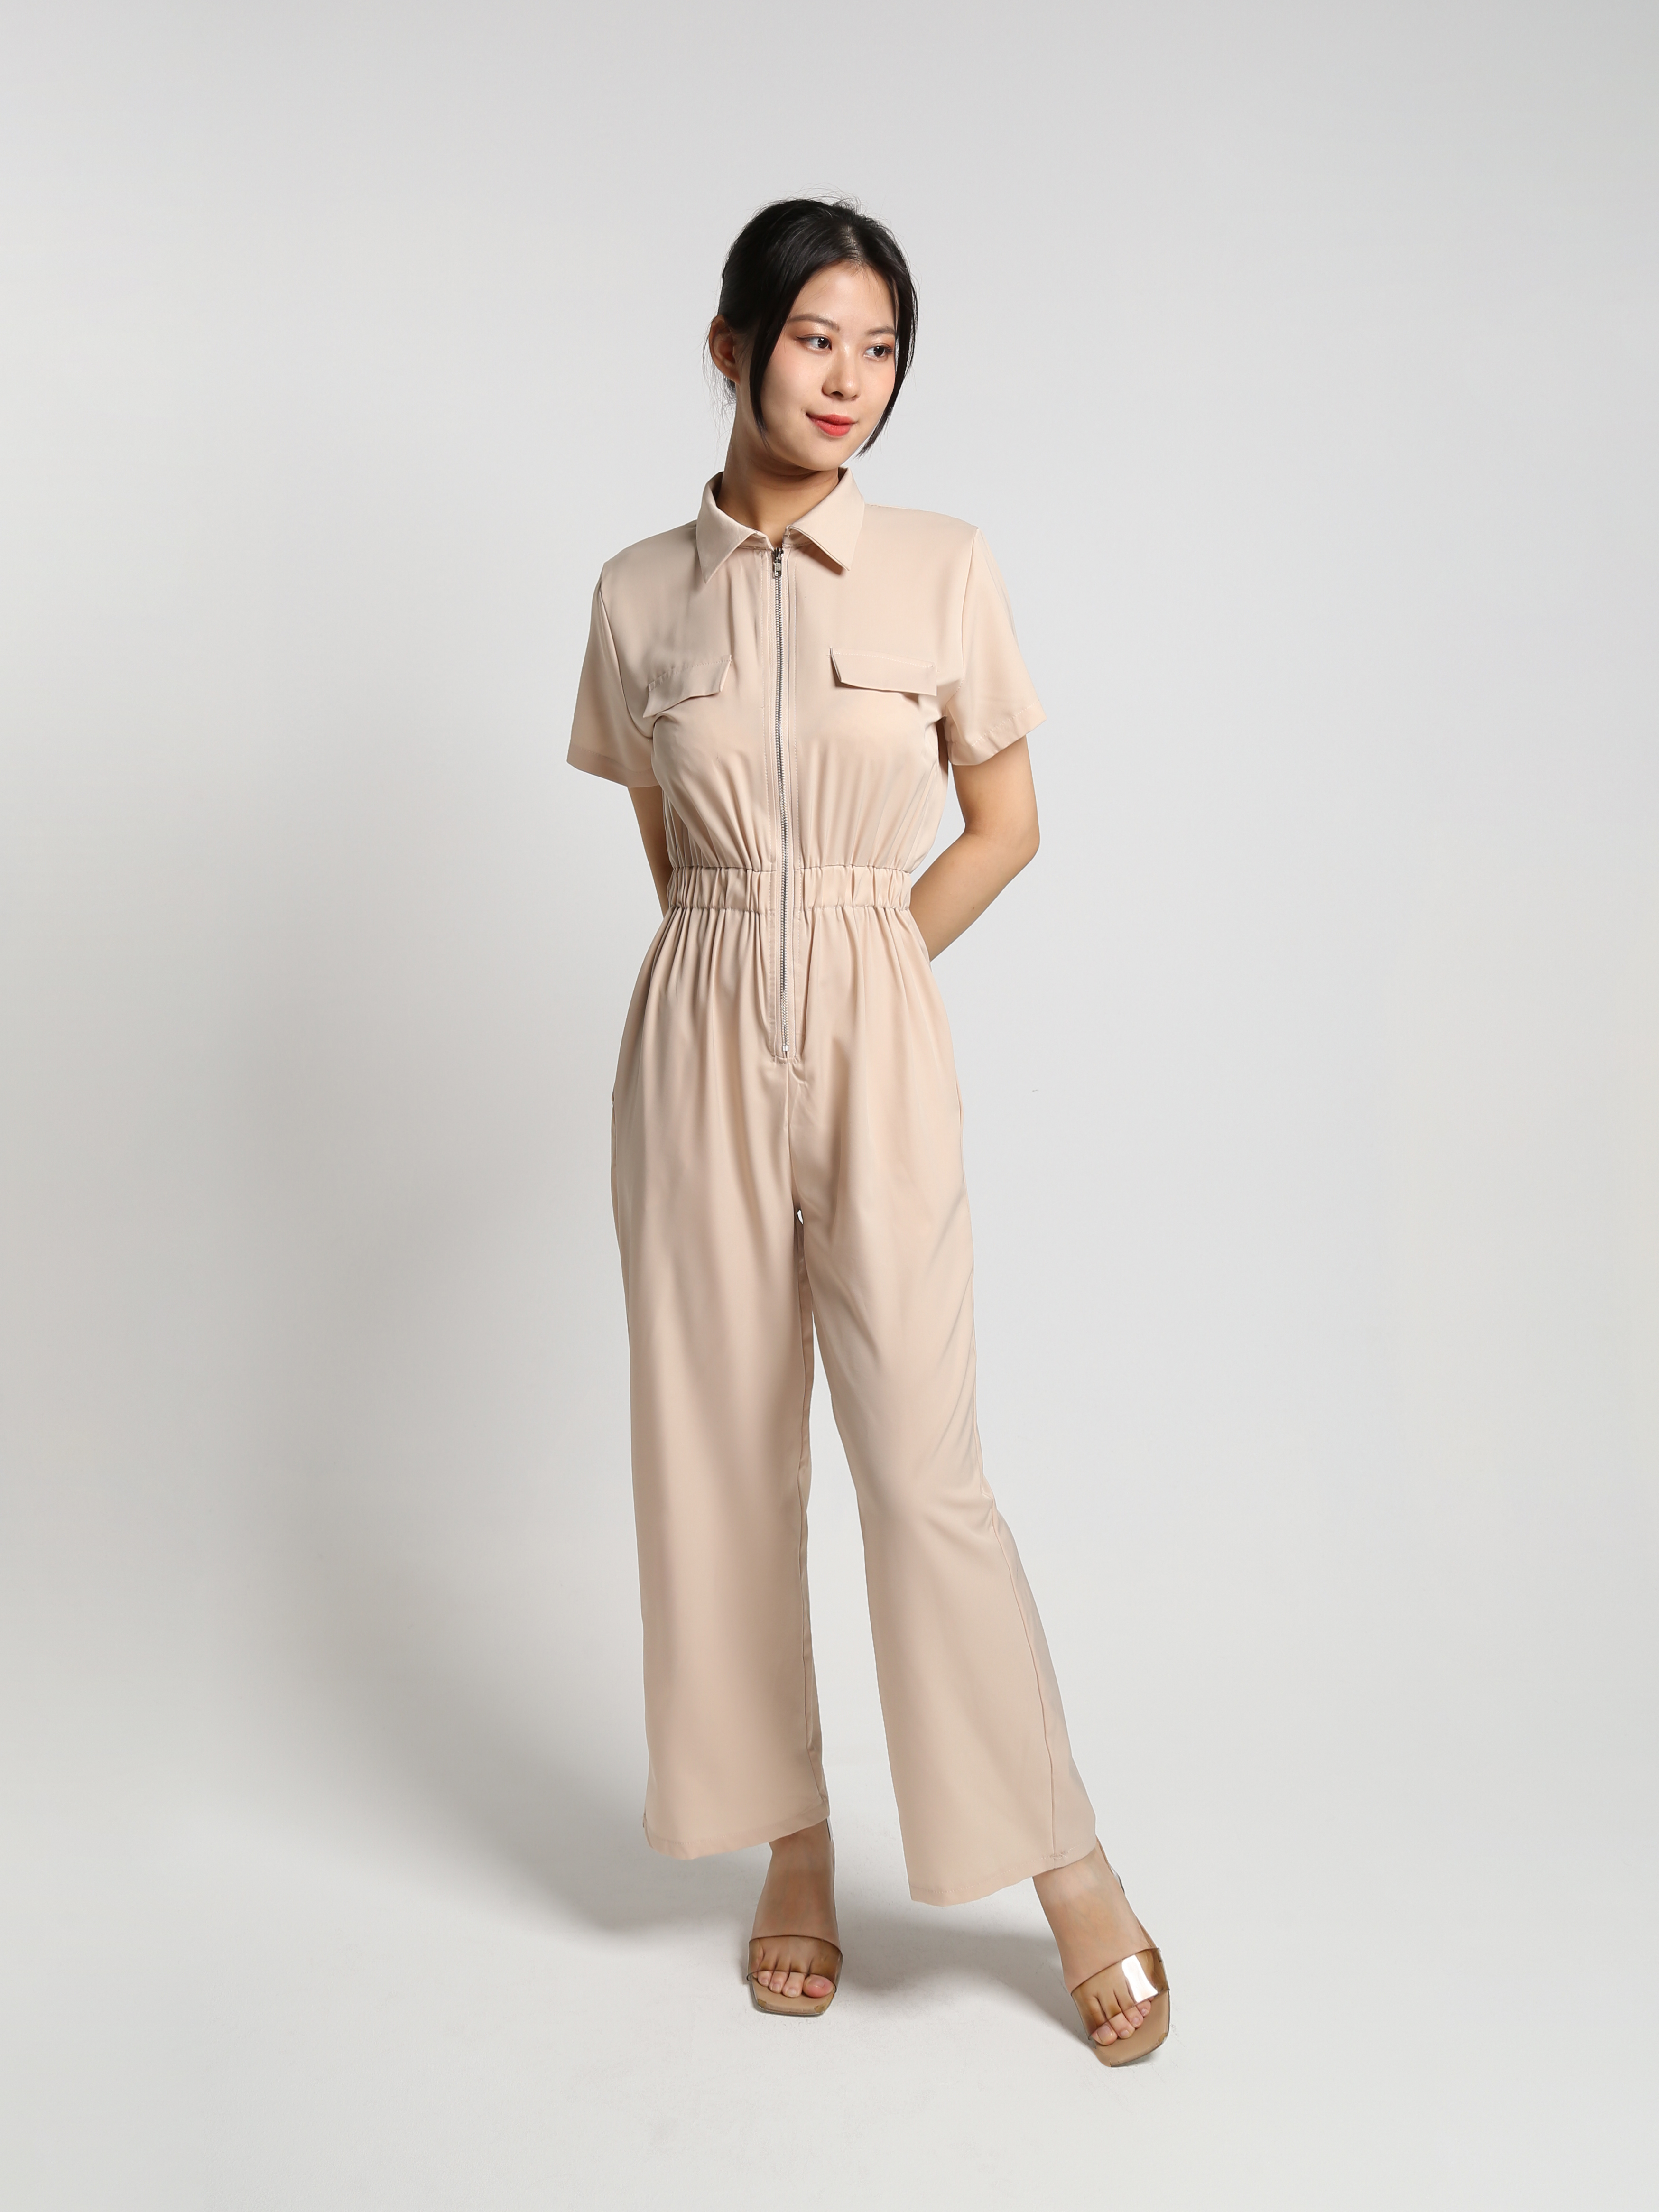 Short Sleeve Front Zip With Waist Stretchable Jumpsuit 23384